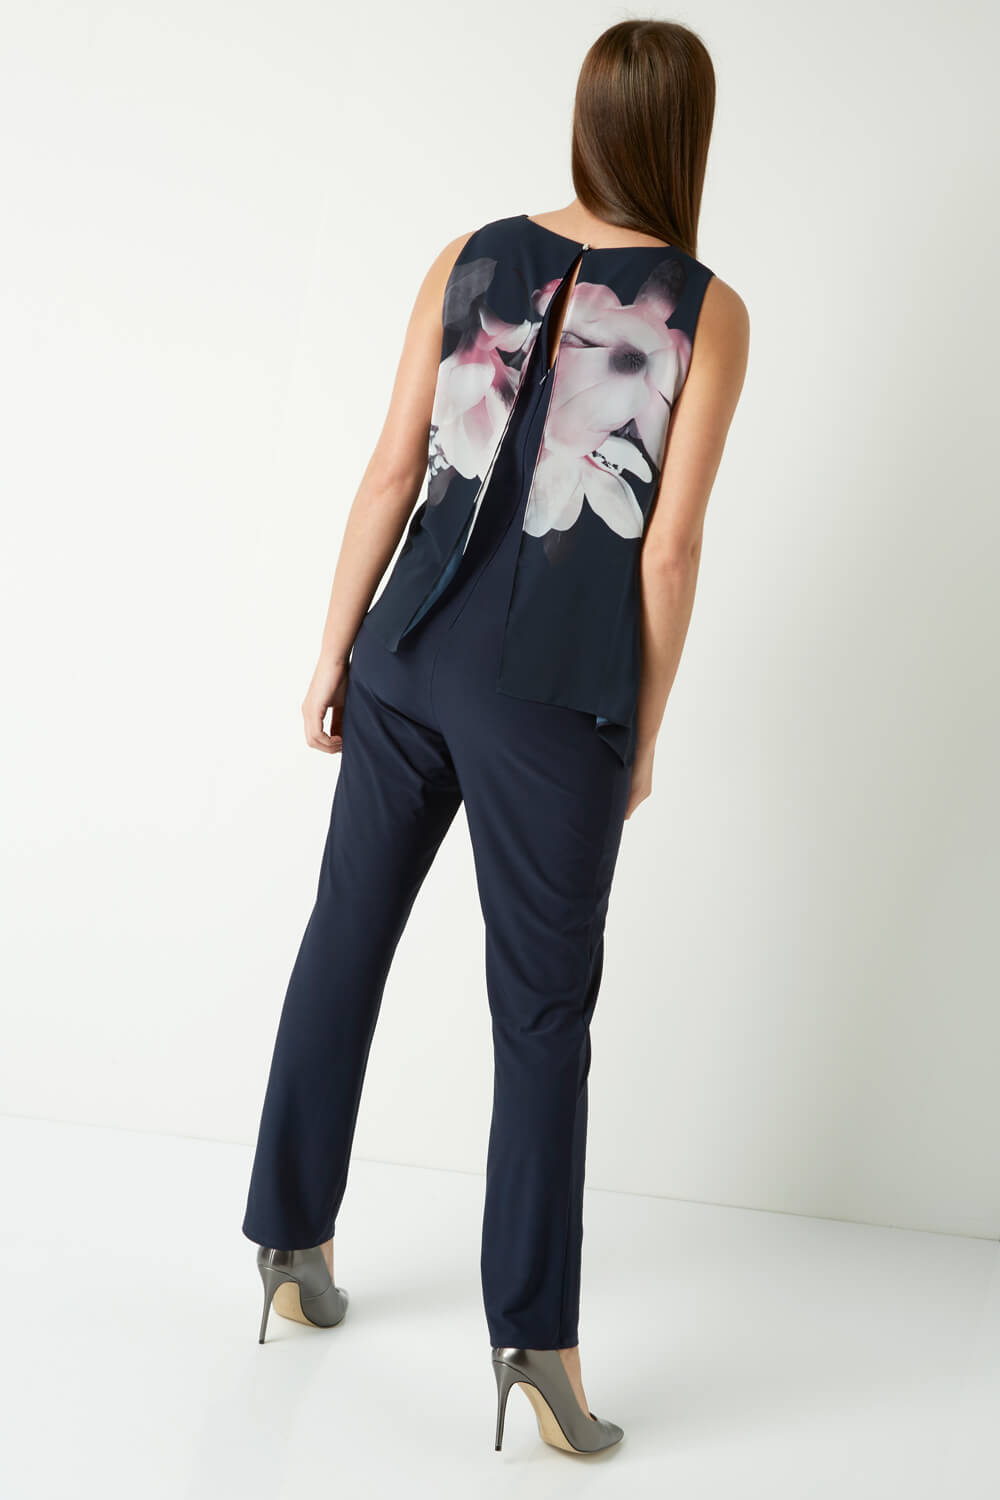 Navy  Floral Print Chiffon Overlay Jumpsuit, Image 2 of 4